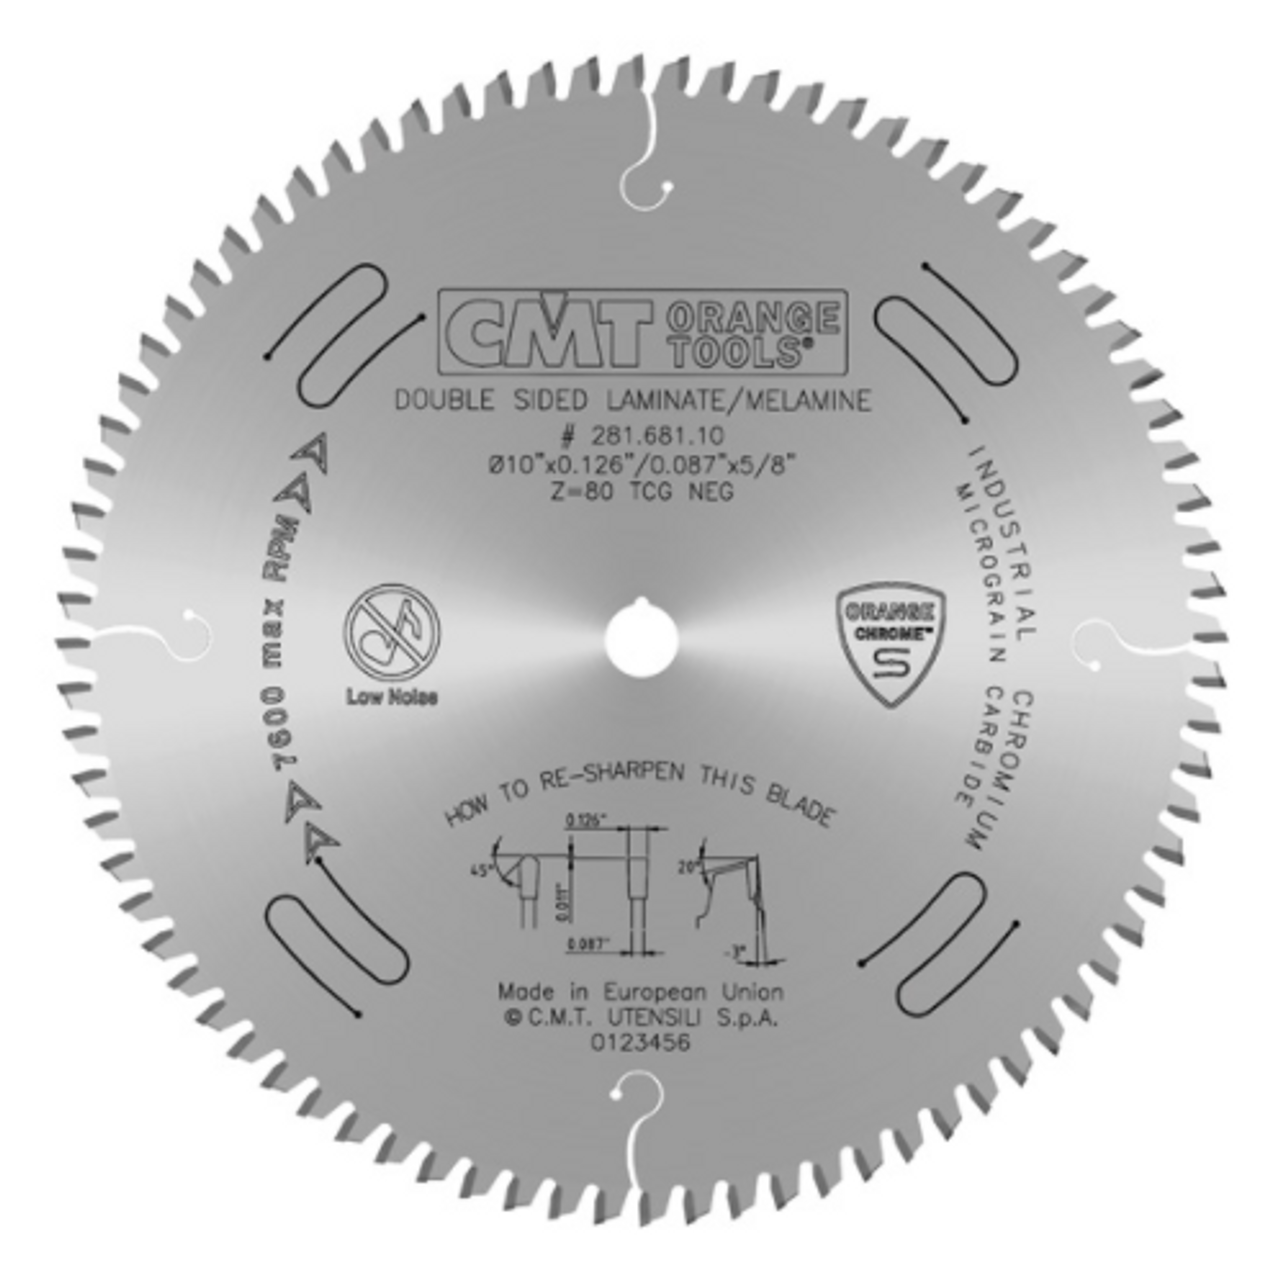 CMT 281.697.12,12'' + 1/64'',Industrial Chromed Double Sided Laminate/Melamine Blades